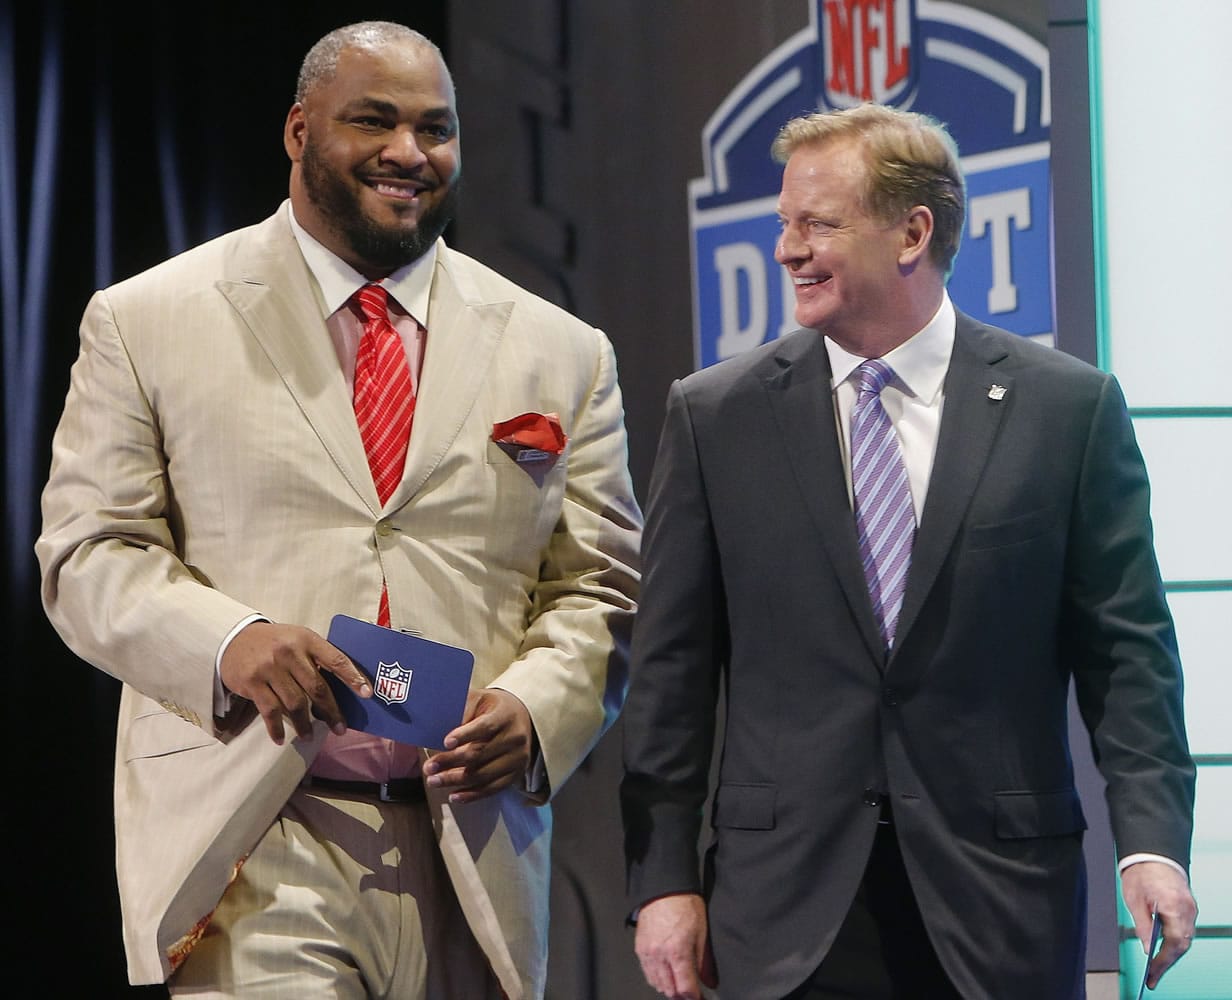 Walter Jones, left, walks with NFL Commissioner Roger Goodell after Jones announced a Seattle Seahawks'  pick at the 2014 NFL Draft in New York.